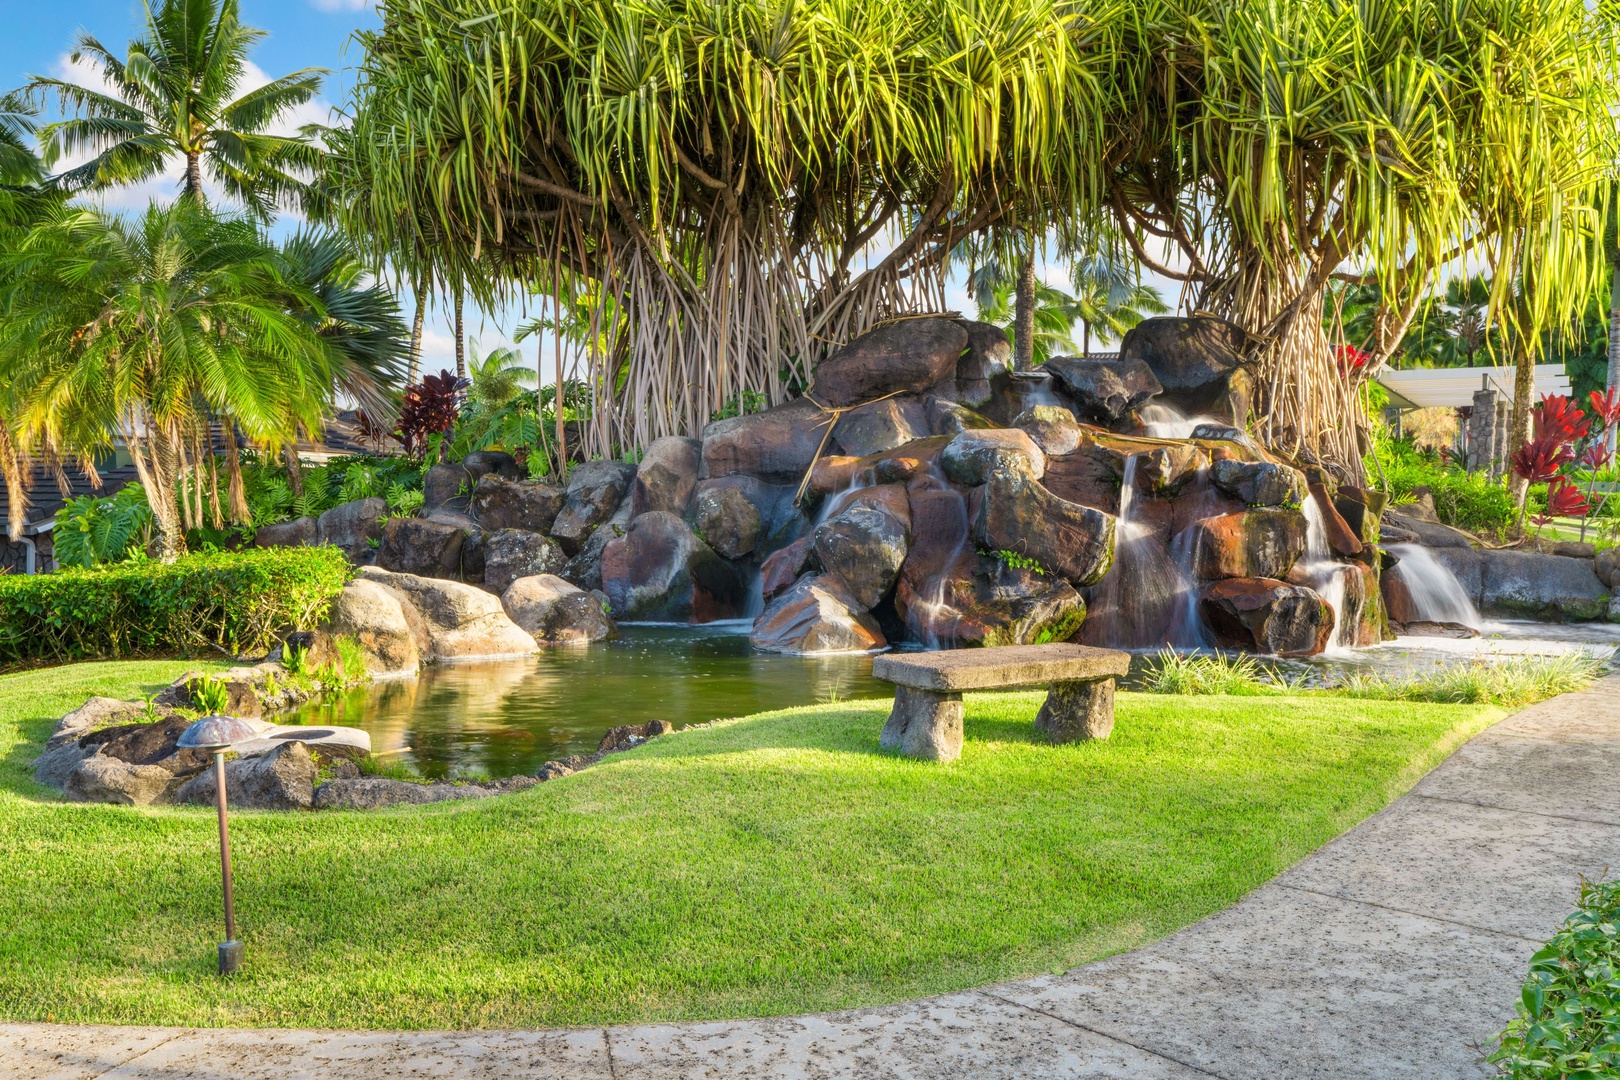 Princeville Vacation Rentals, Tropical Elegance - Experience the harmony of nature in our immaculately kept garden, a sanctuary of lush greenery, pond, and blooming flowers.